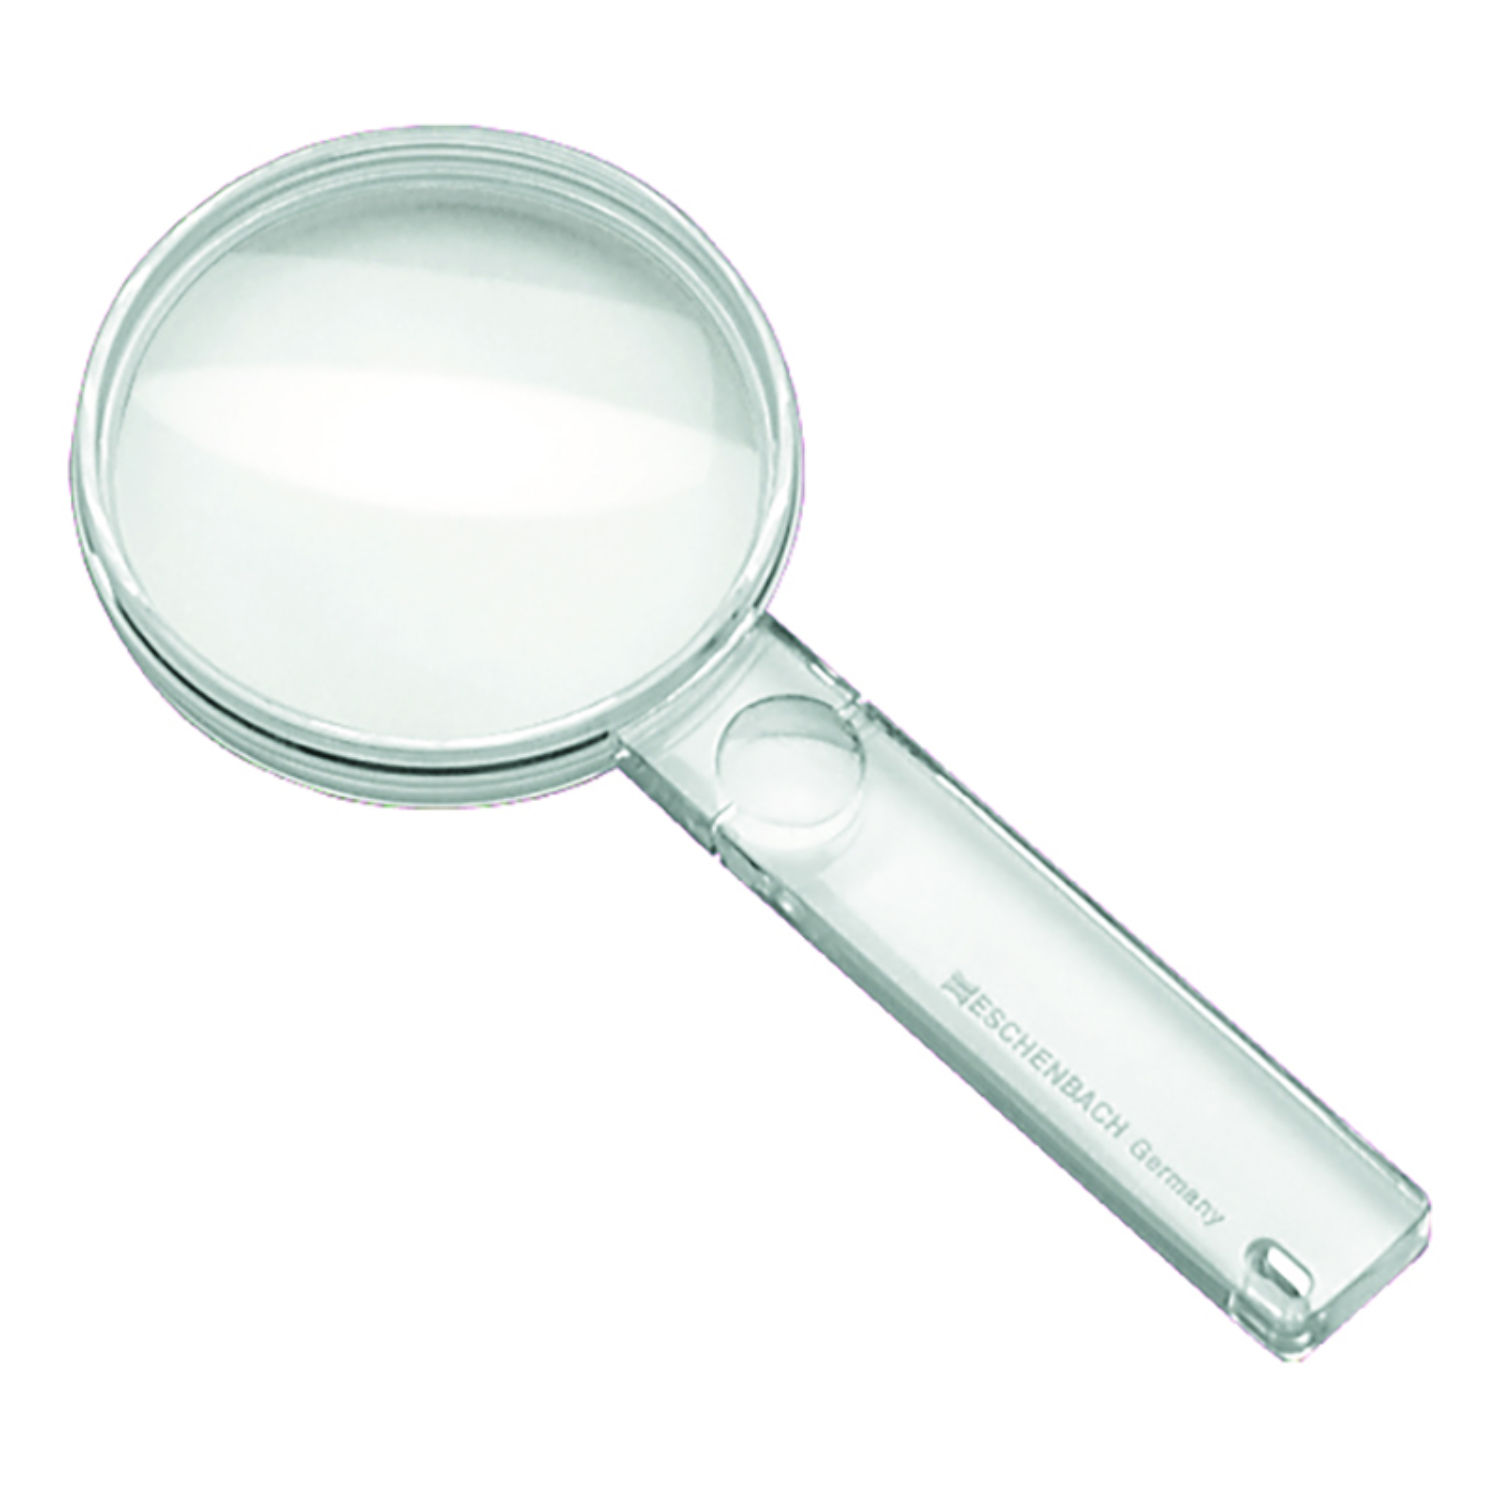 Image of 2.7x round biconvex lens hand-held magnifier from Eschenbach Optik